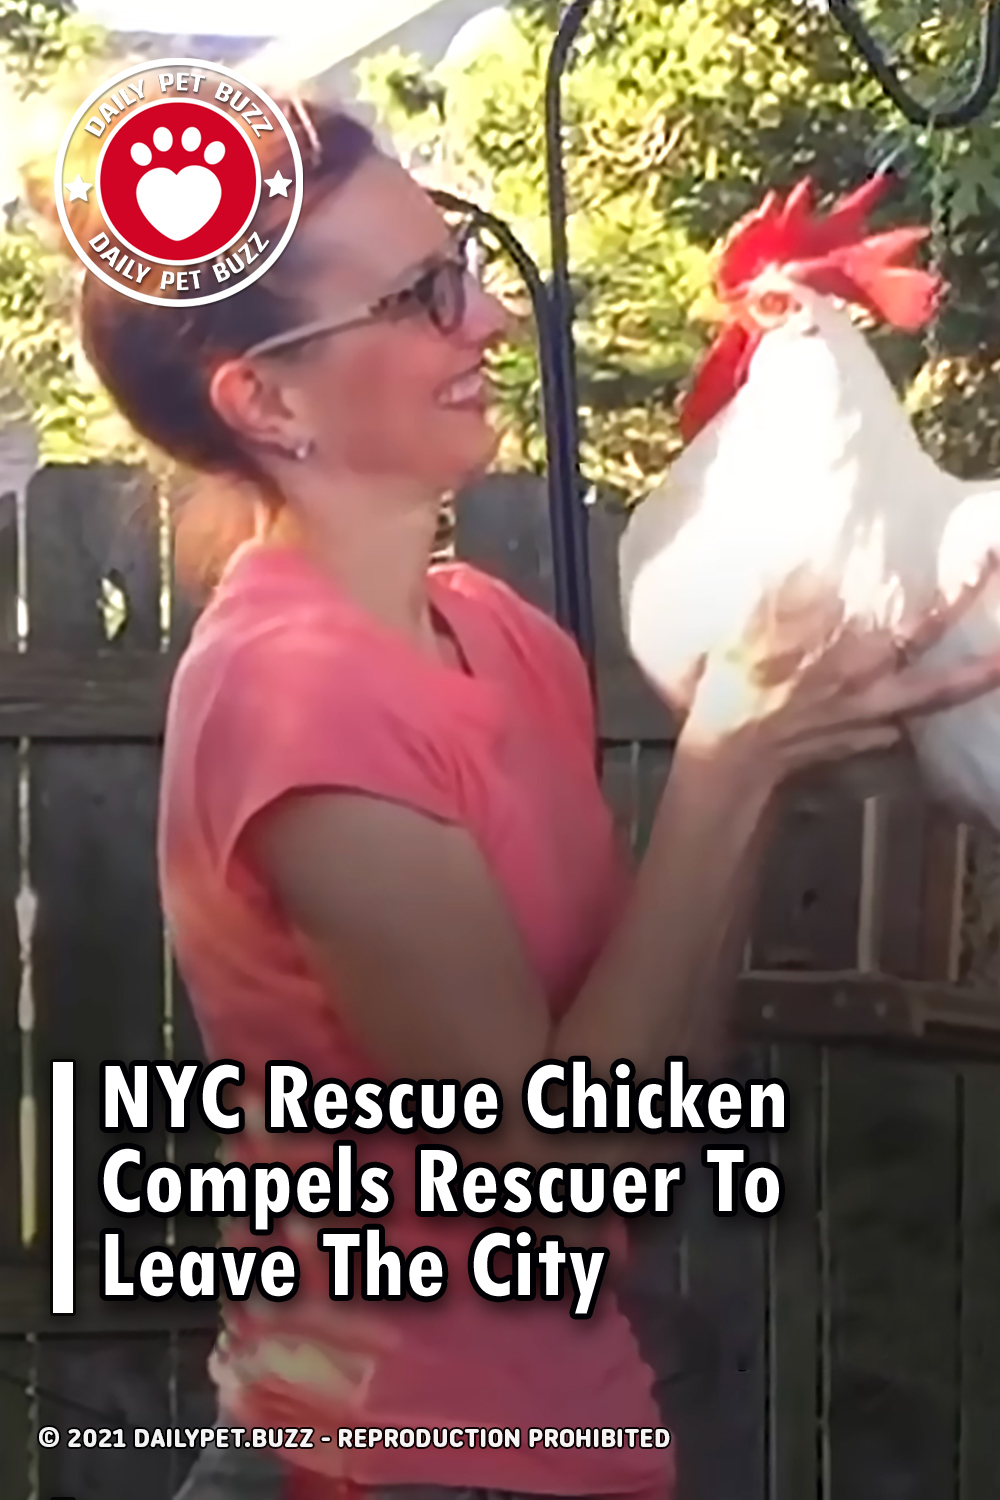 NYC Rescue Chicken Compels Rescuer To Leave The City